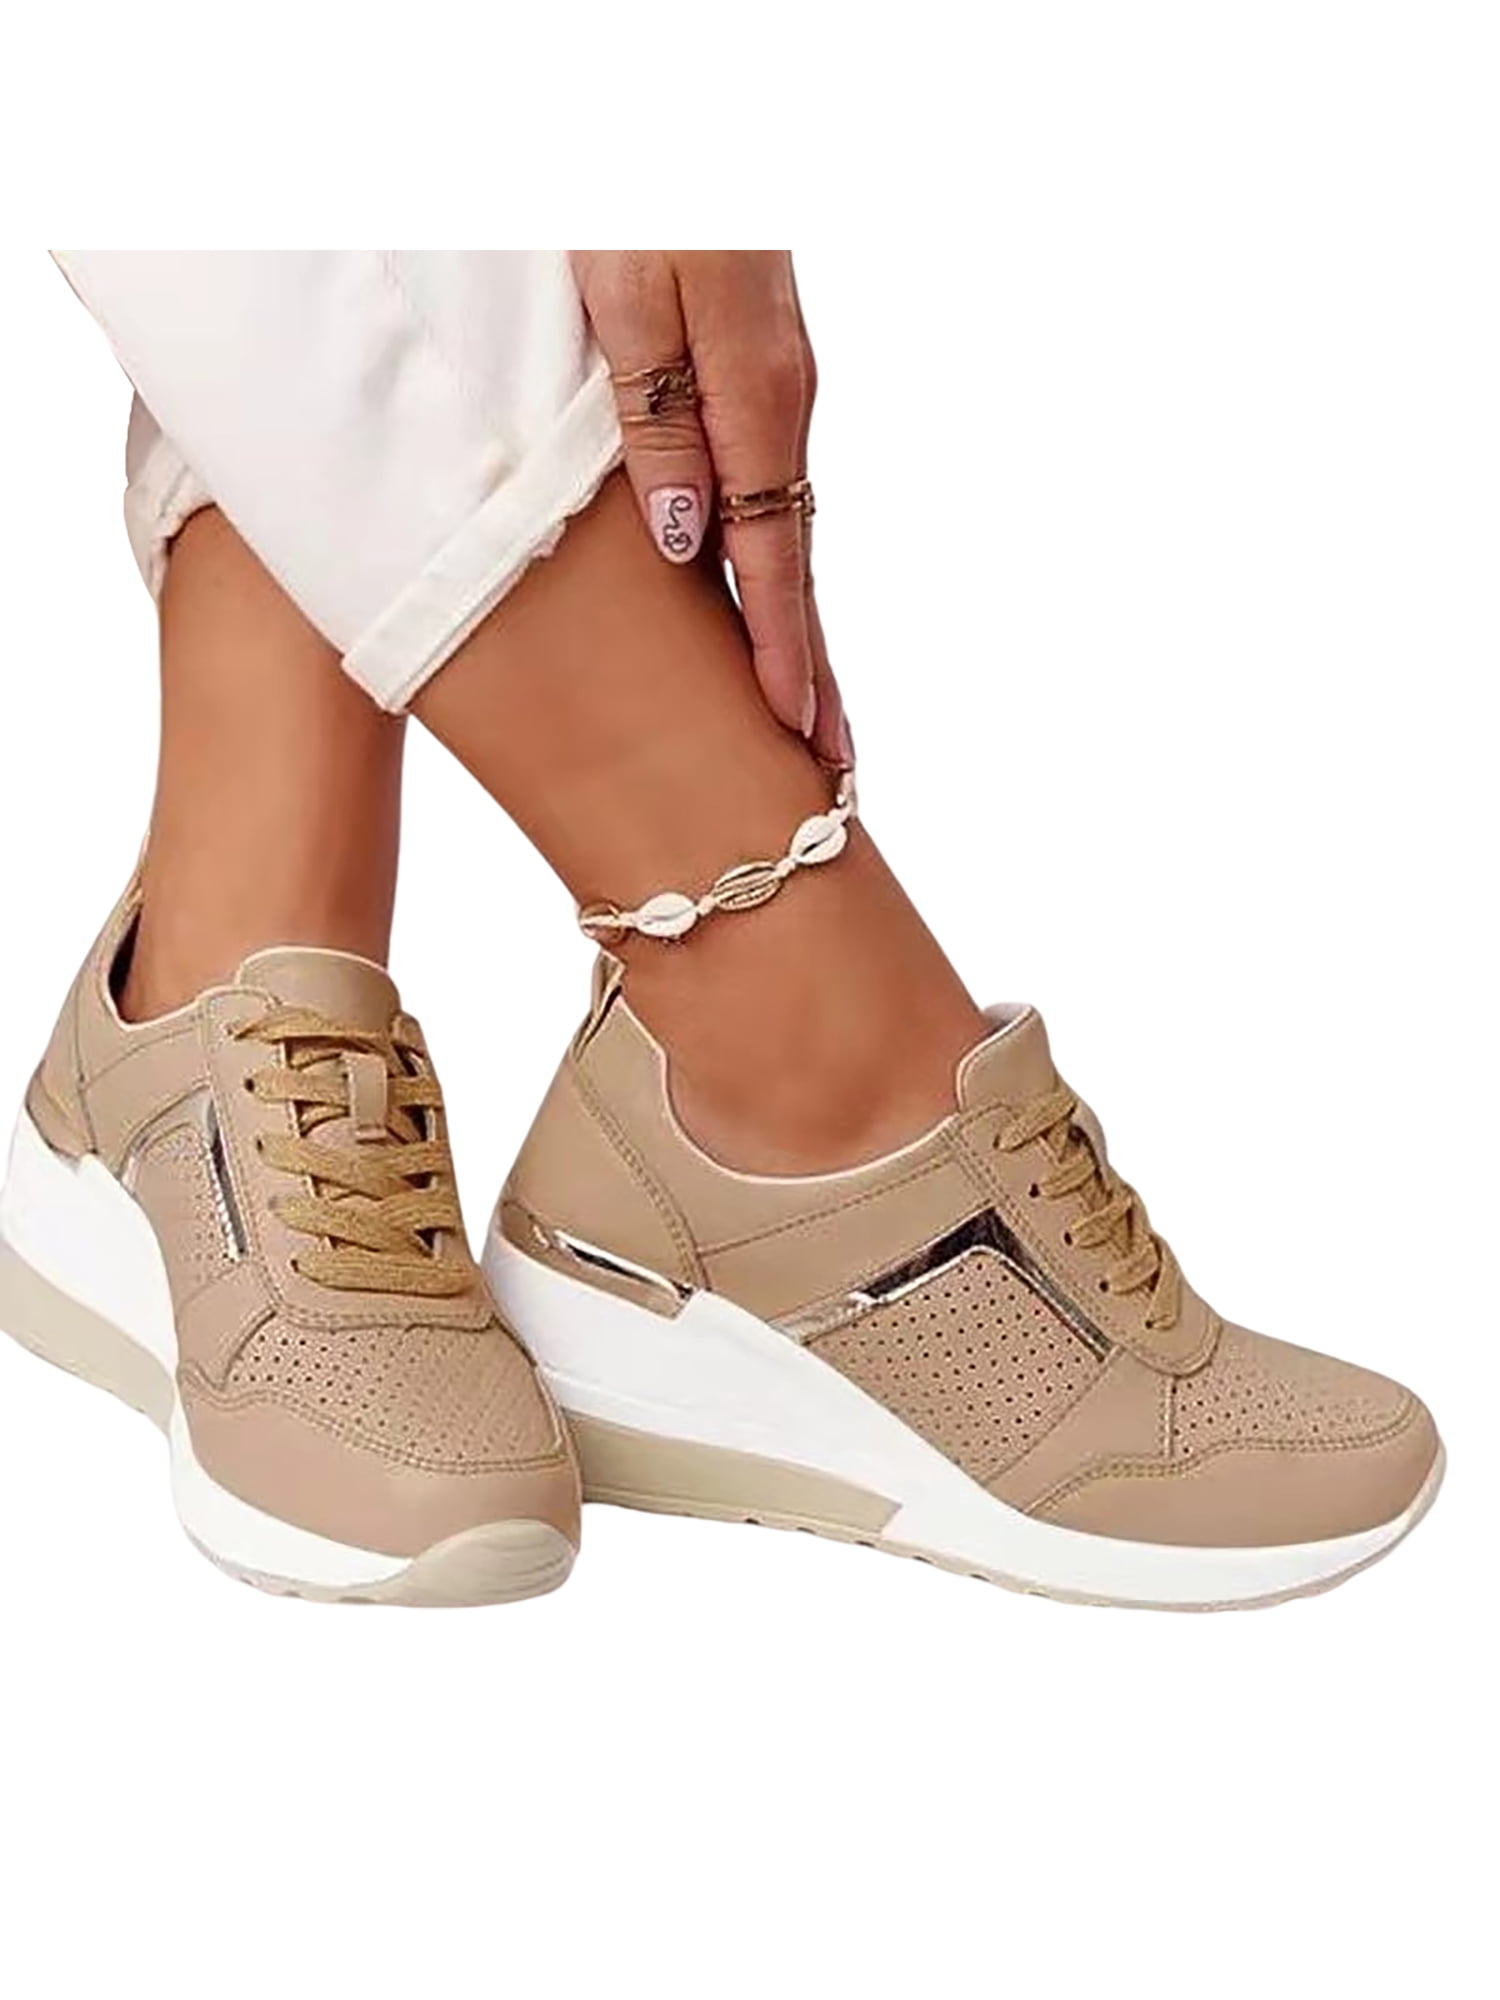 Rotosw Womens Fashion Lace Up Lightweight Wedge Sneaker Soft Athletic Shoes - Walmart.com